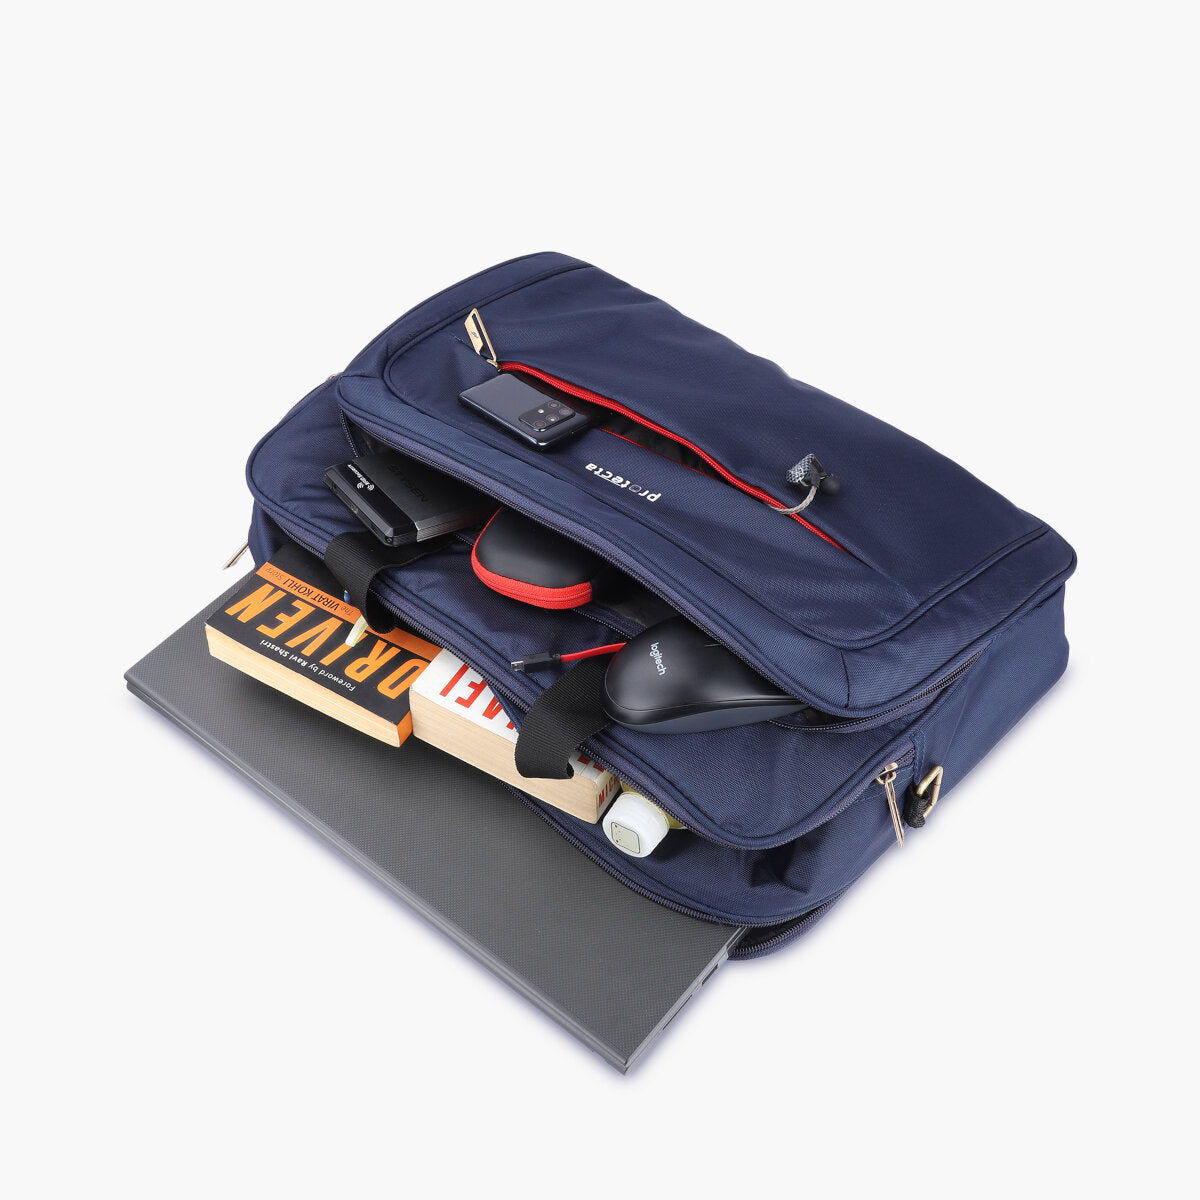 Navy-Red, Protecta Staunch Ally Travel & Offfice Laptop Bag-Main